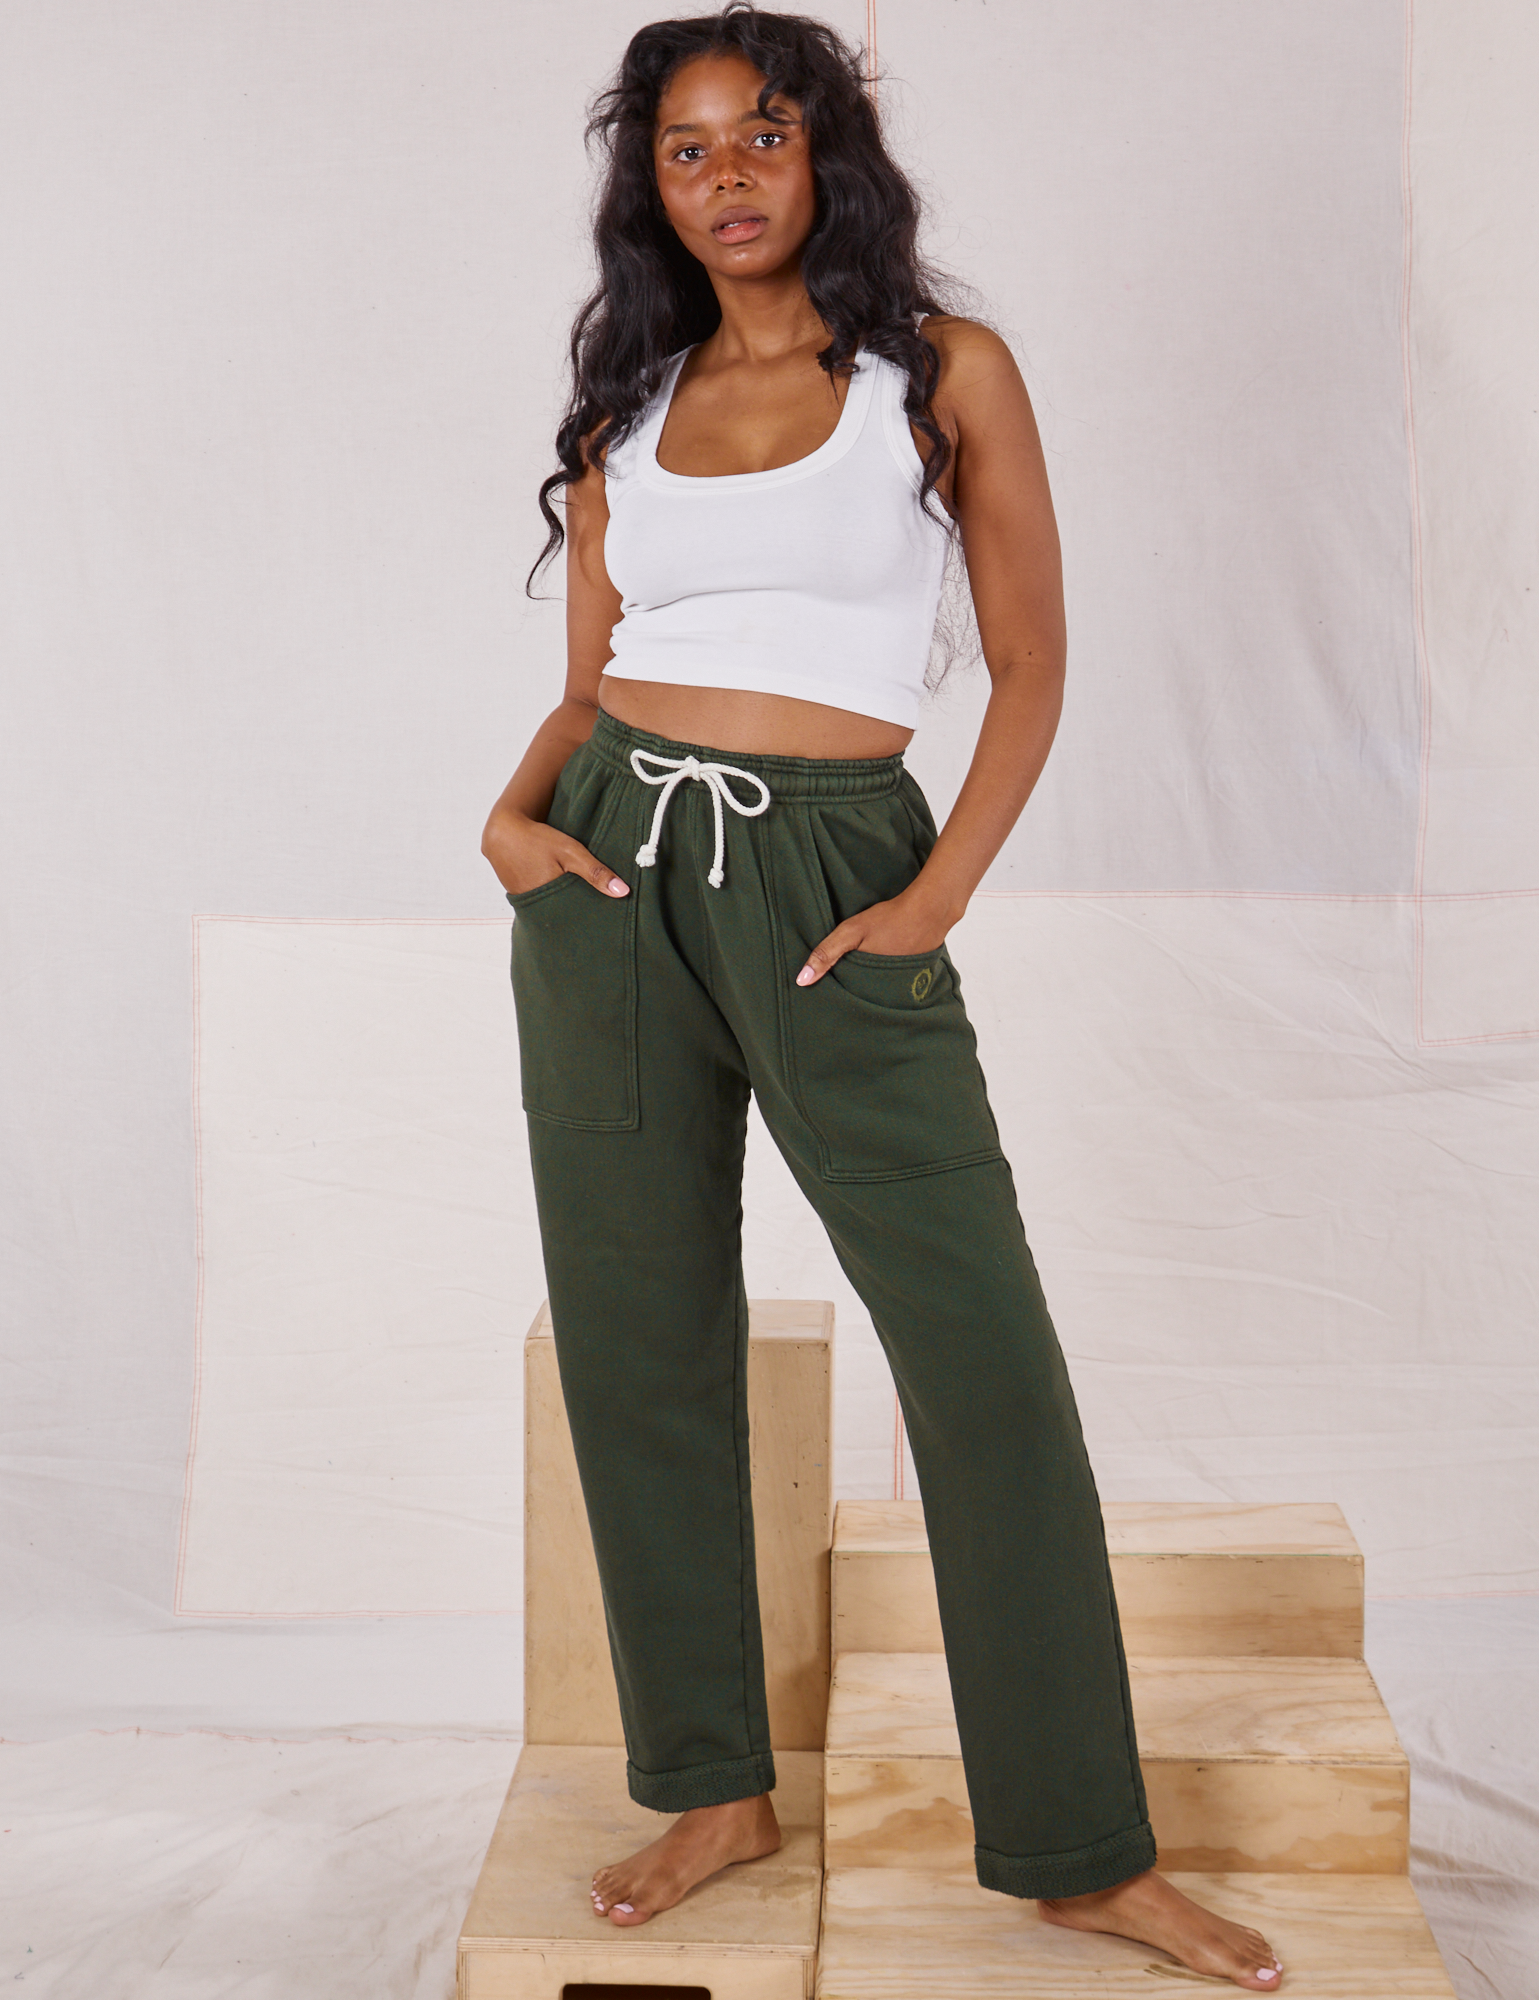 Kandia is 5&#39;3&quot; and wearing P Rolled Cuff Sweat Pants in Swamp Green paired with Cropped Tank in vintage tee off-white